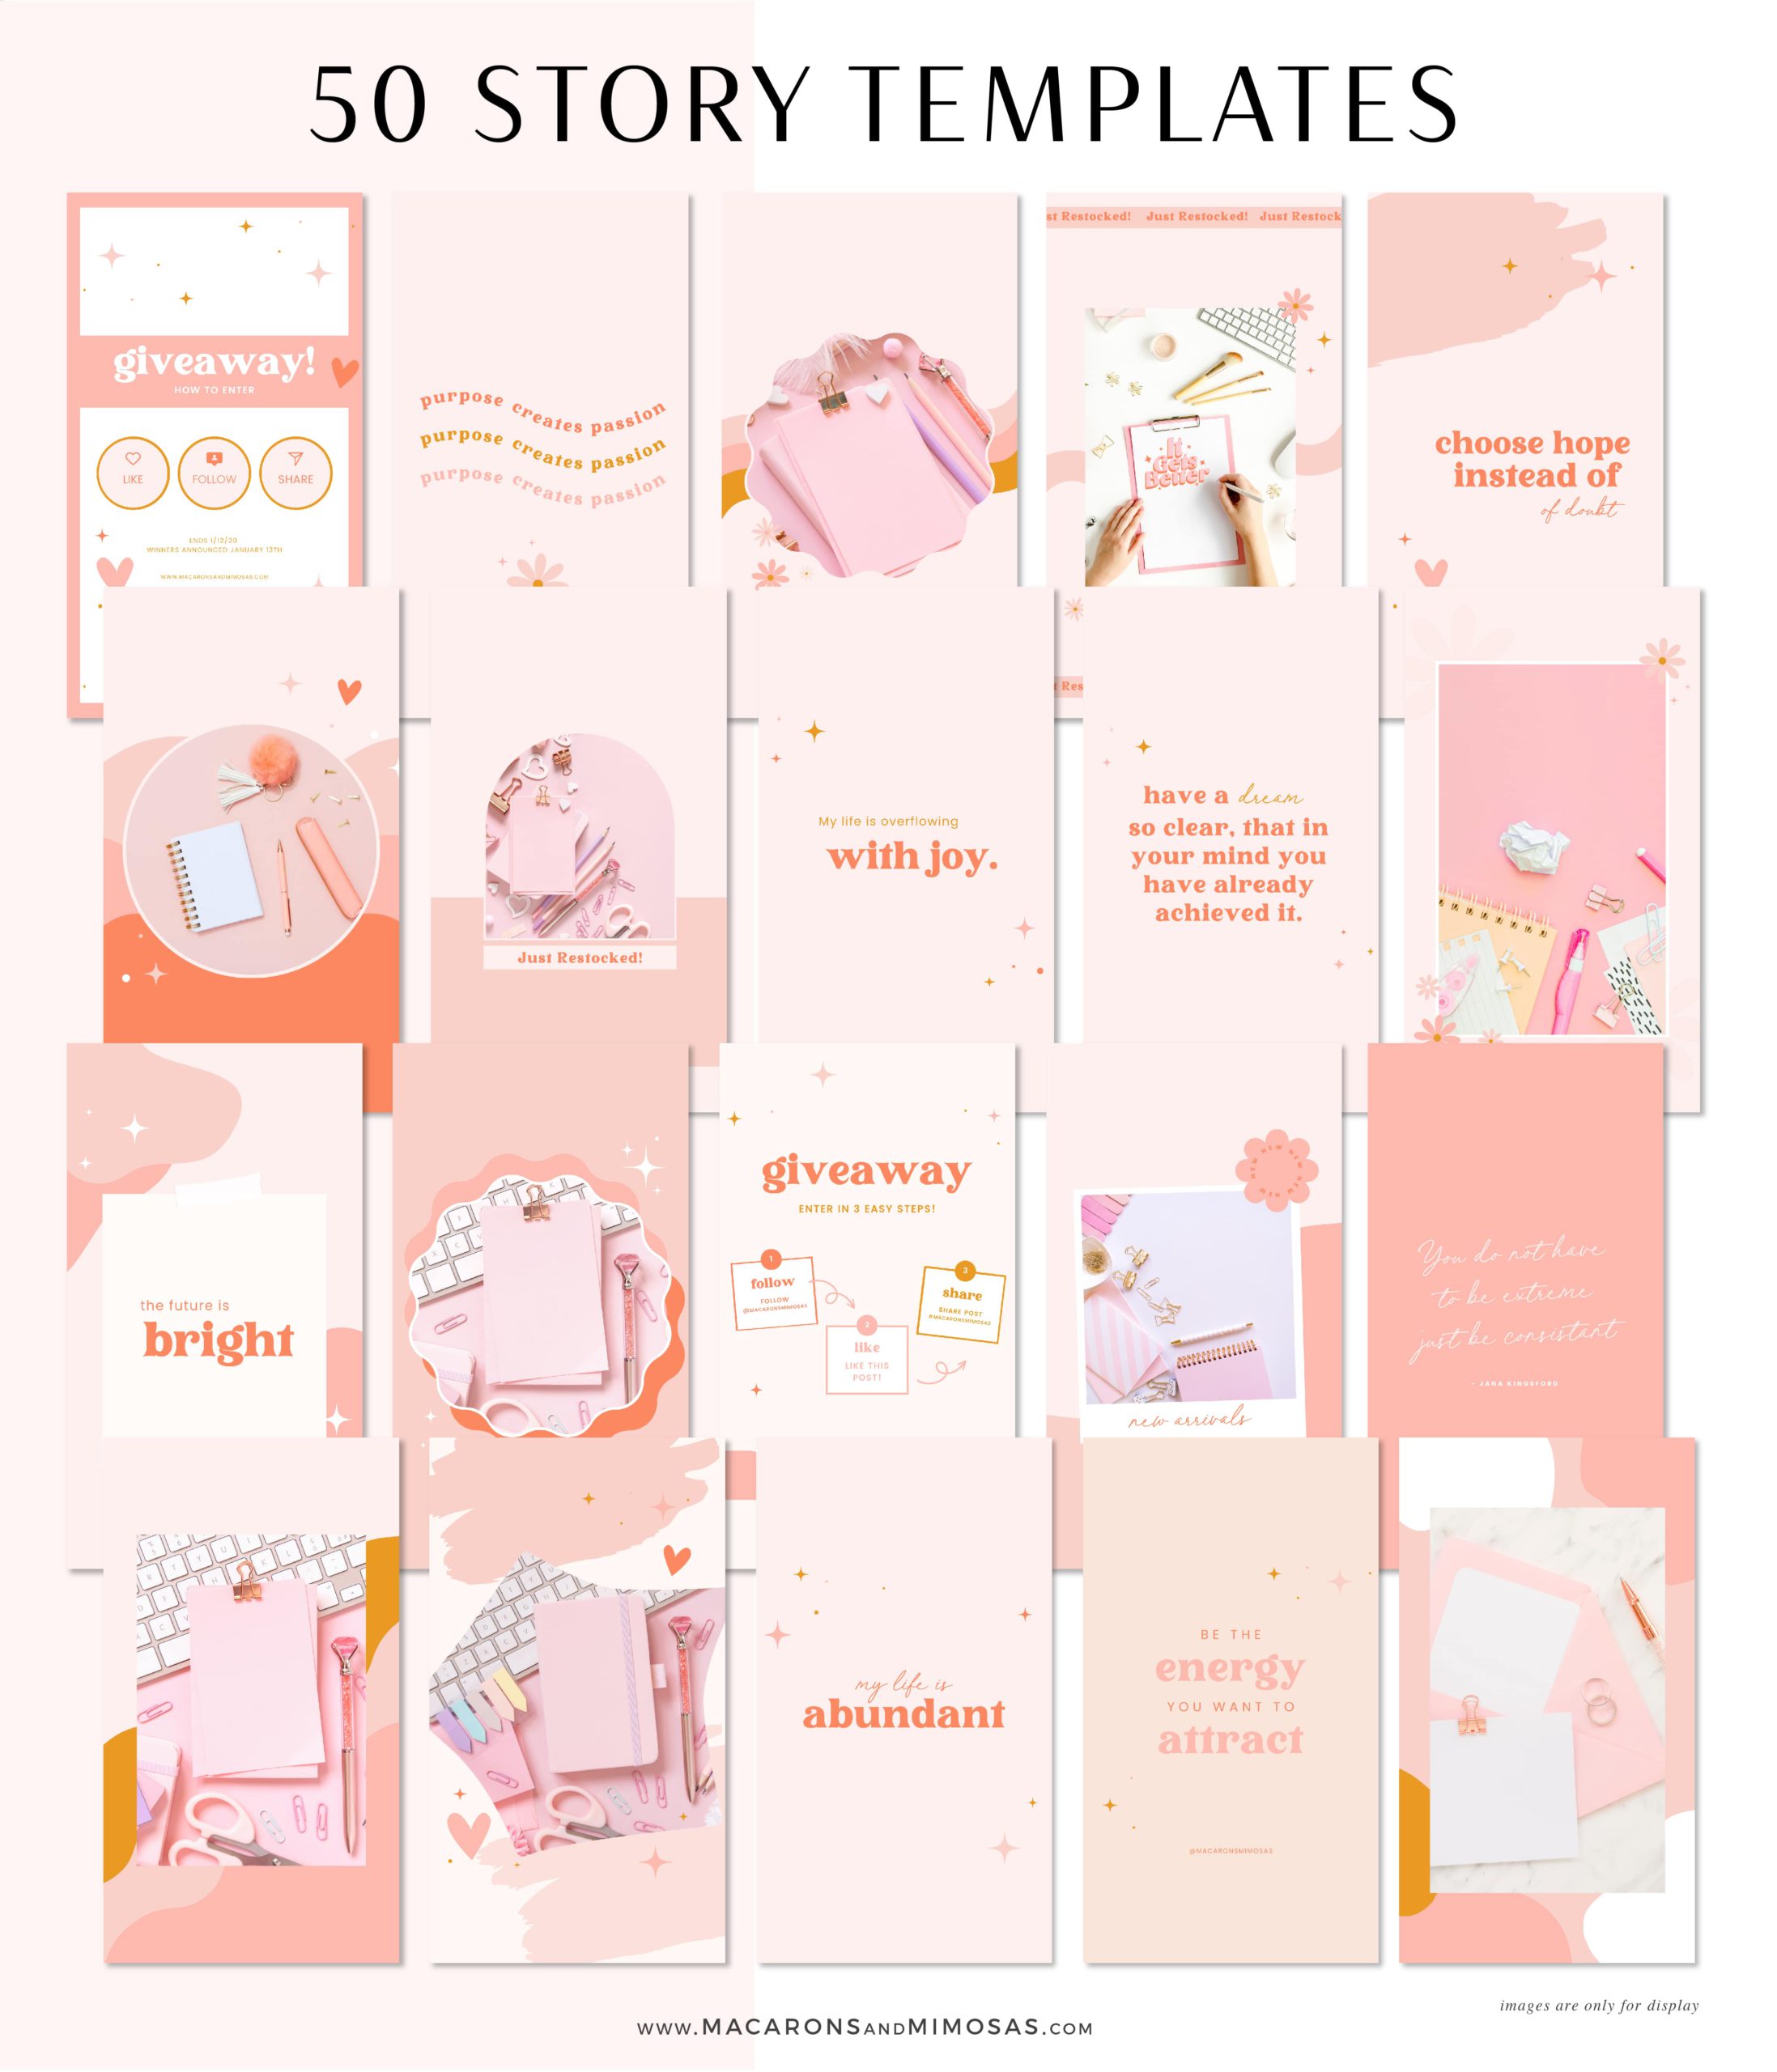 Pink Instagram Story Templates Boho, Bright Quotes for Instagram, Creative Instagram Templates, Free Colorful Canva Designs, Small Business Brand